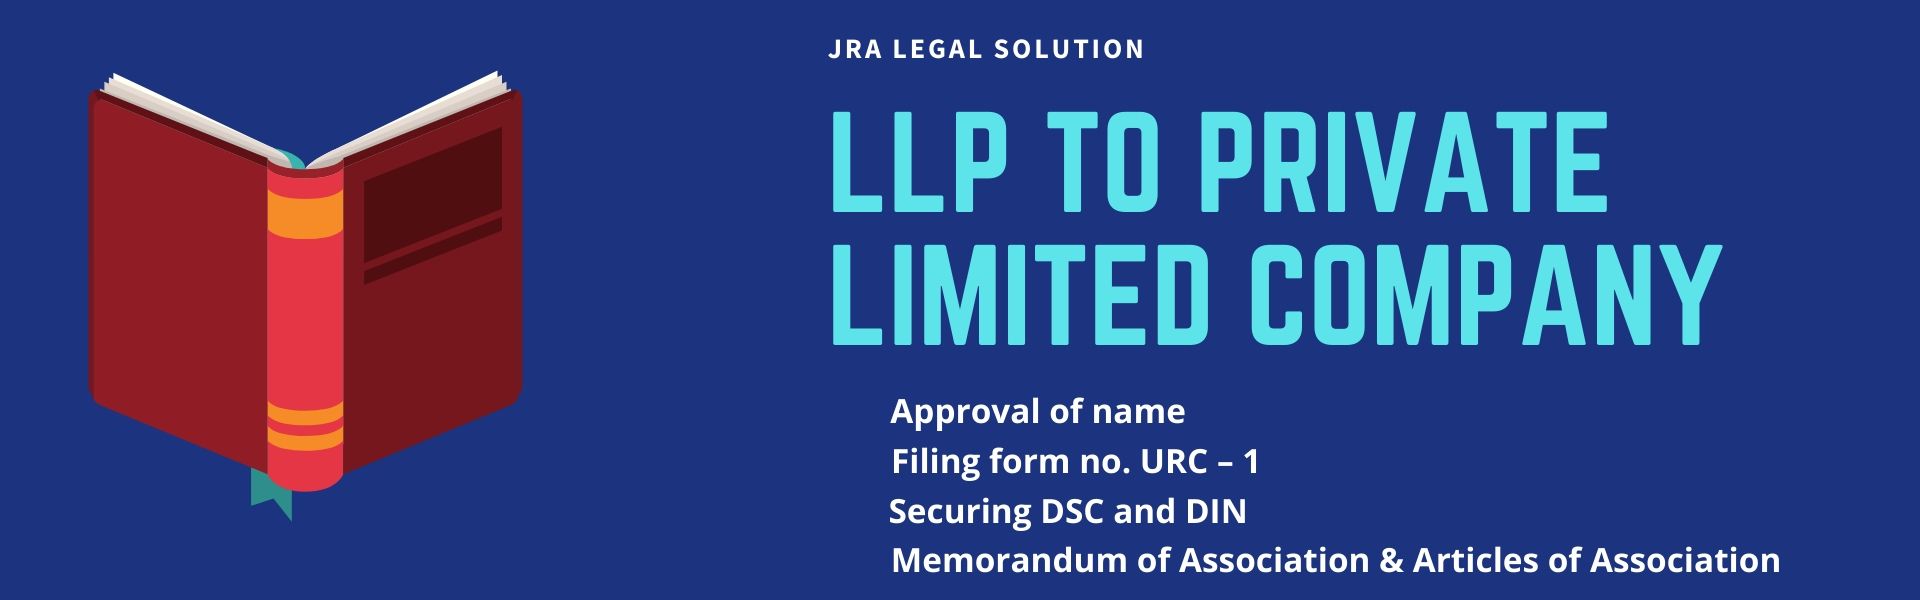 LLP to Private Limited Company